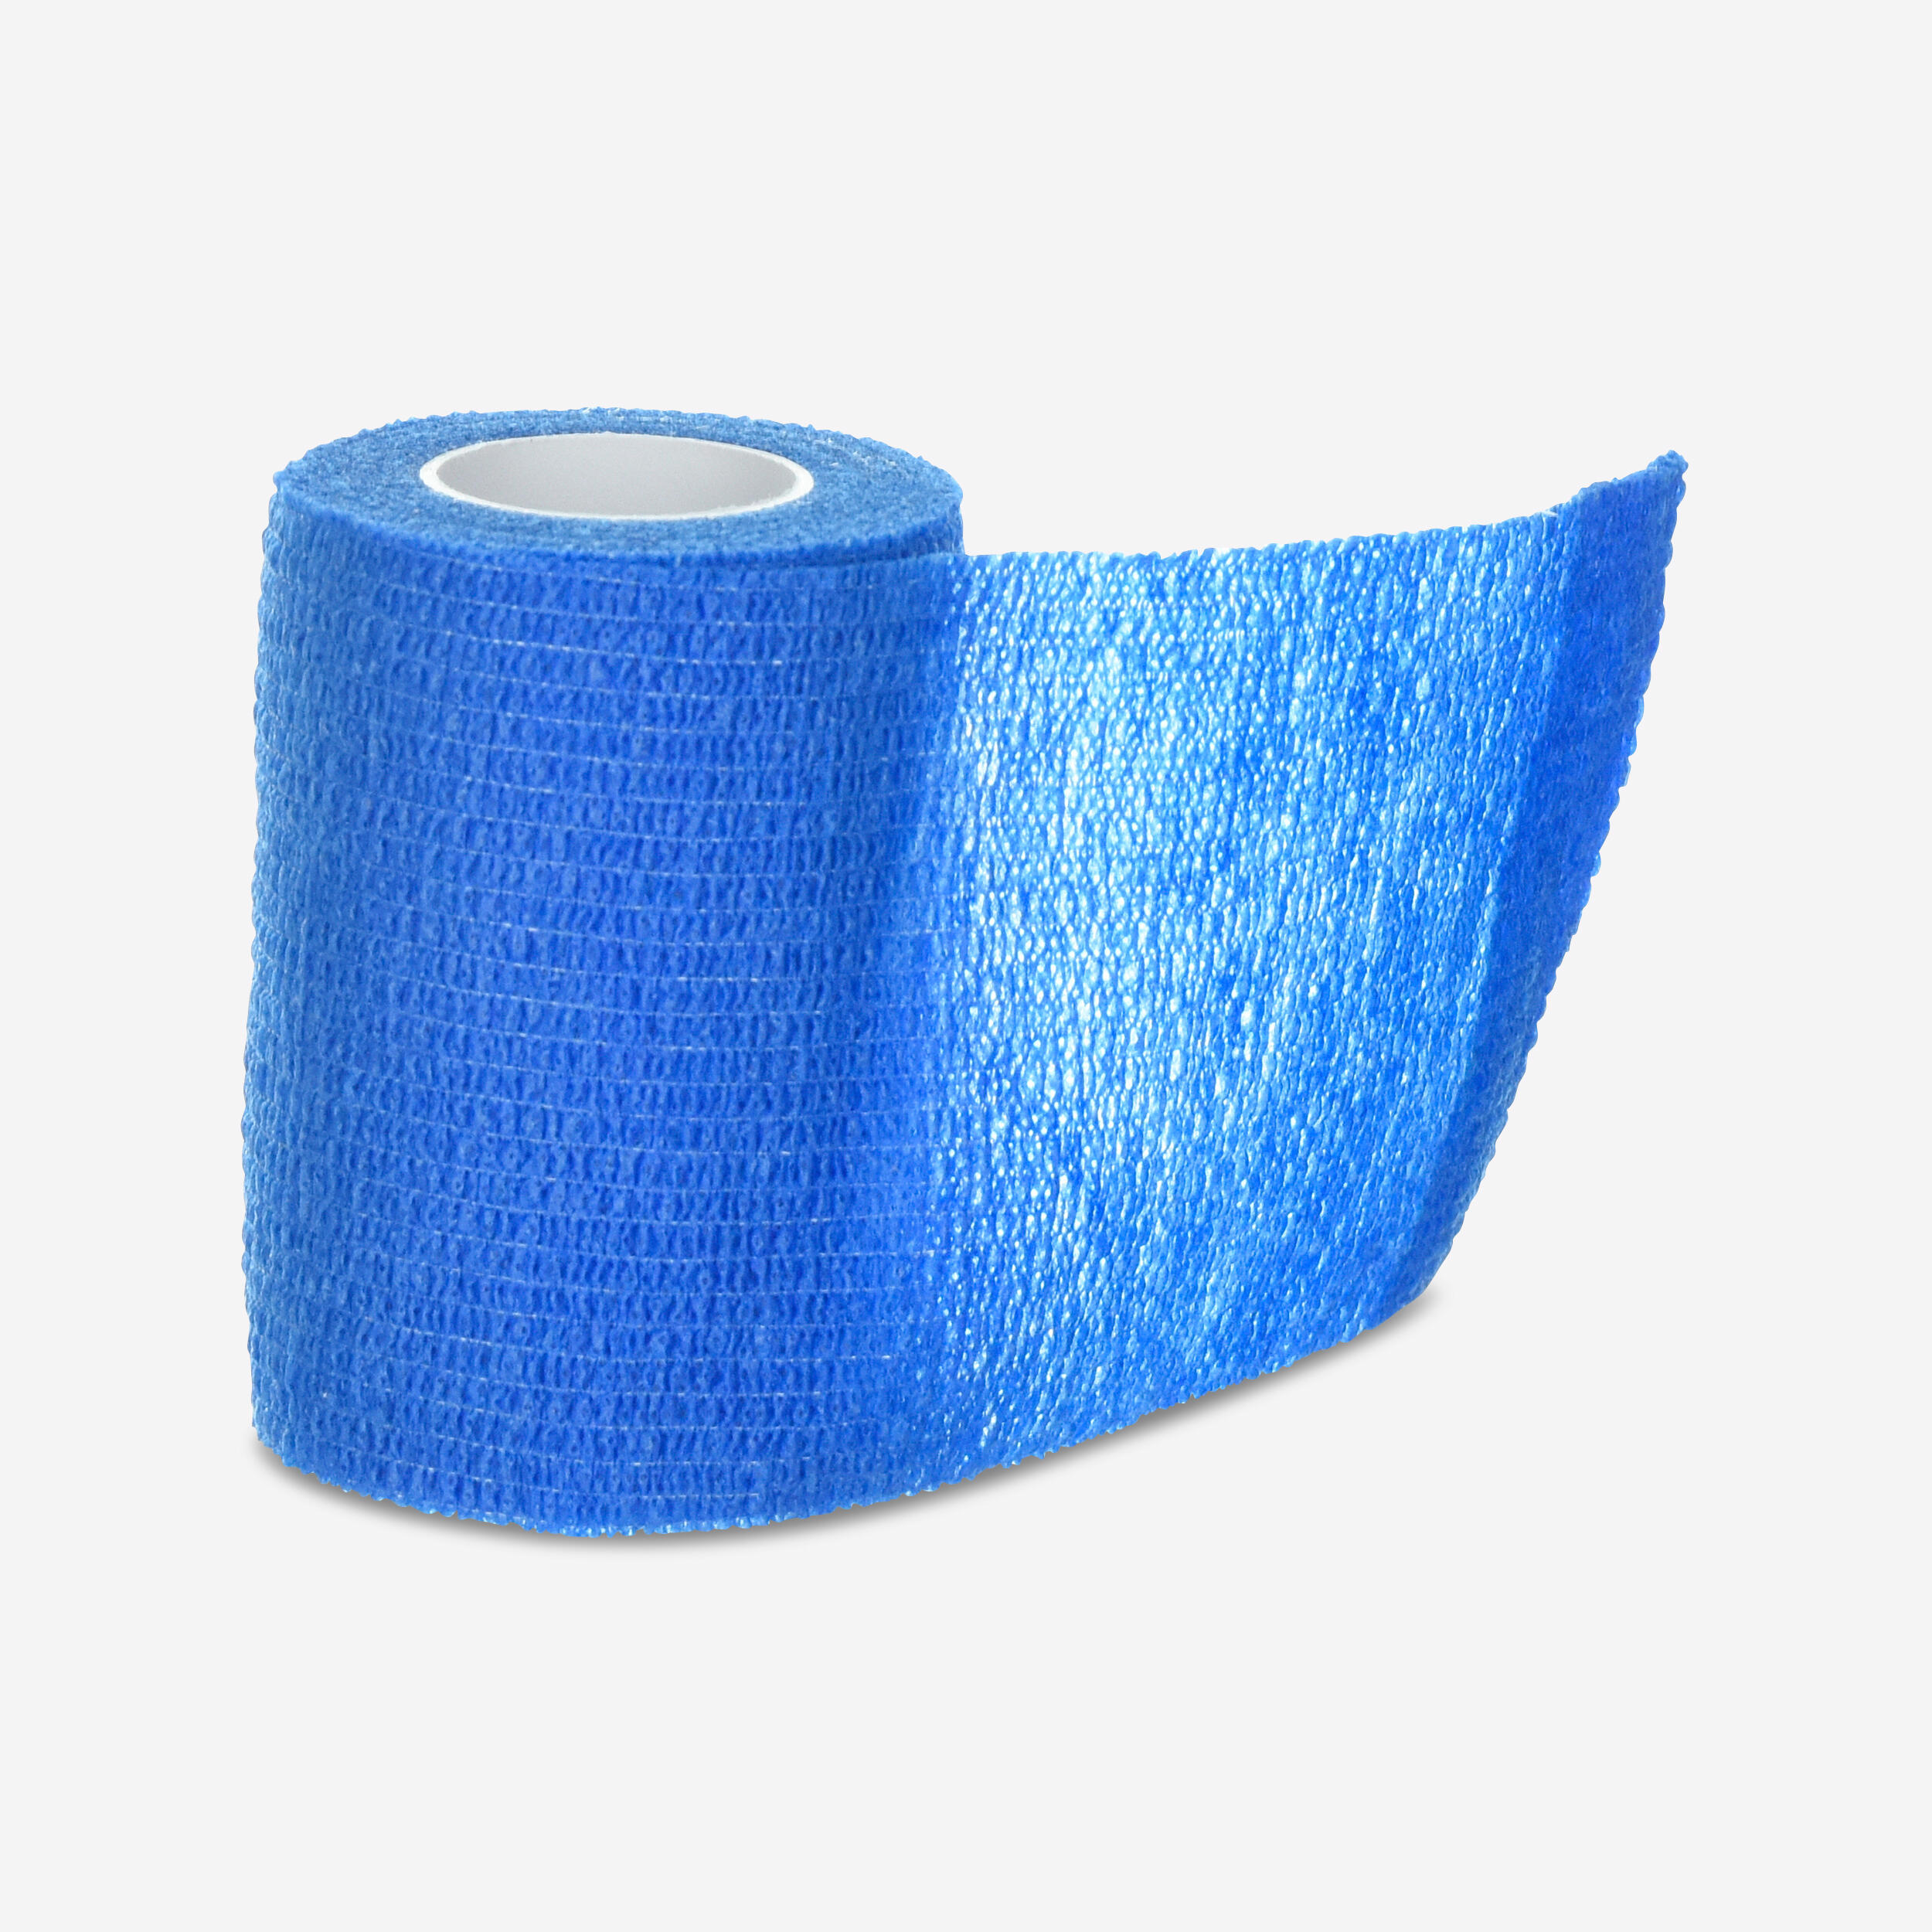 7.5 cm x 4.5 m Movable Self-Adhesive Supportive Wrap - Blue 1/2